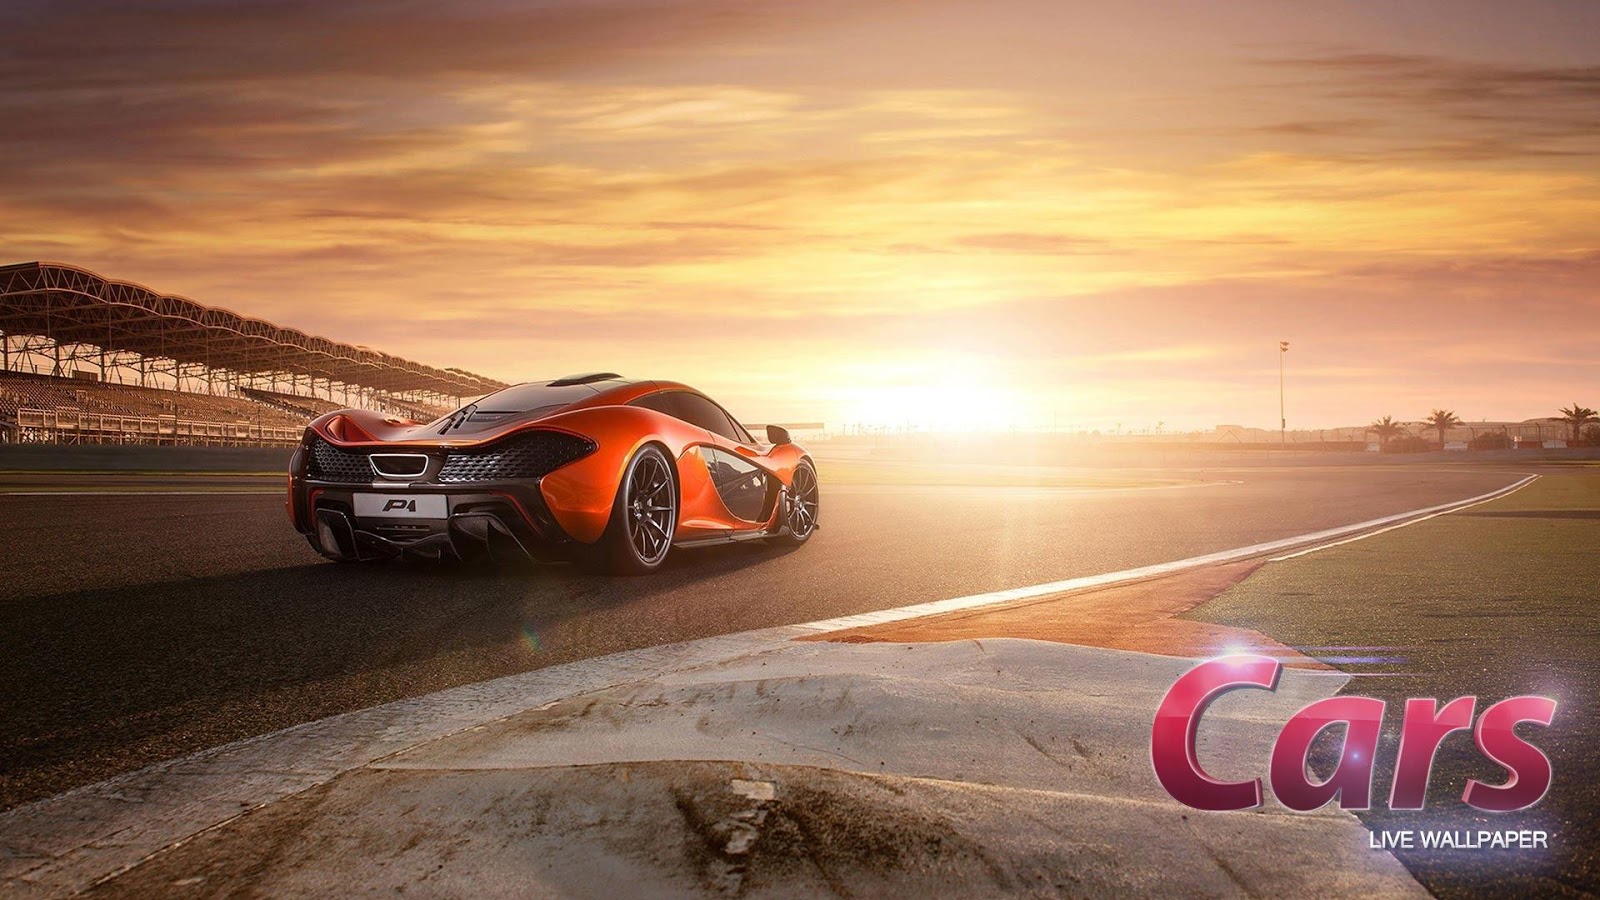 Cars Live Wallpaper Android Apps On Google Play